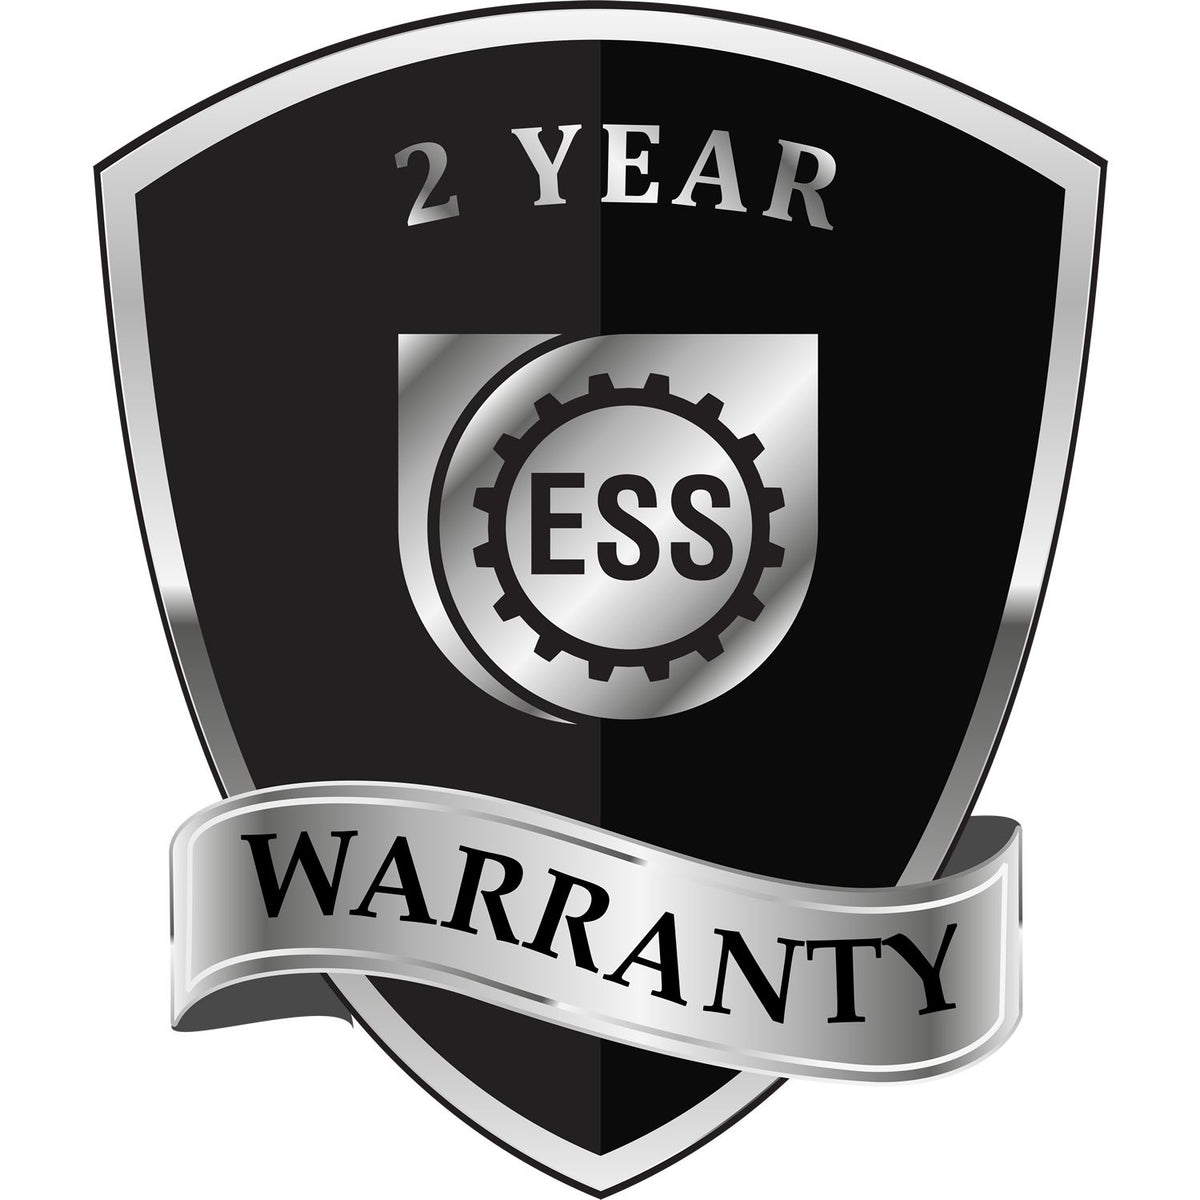 A black and silver badge or emblem showing warranty information for the New Mexico Geologist Desk Seal